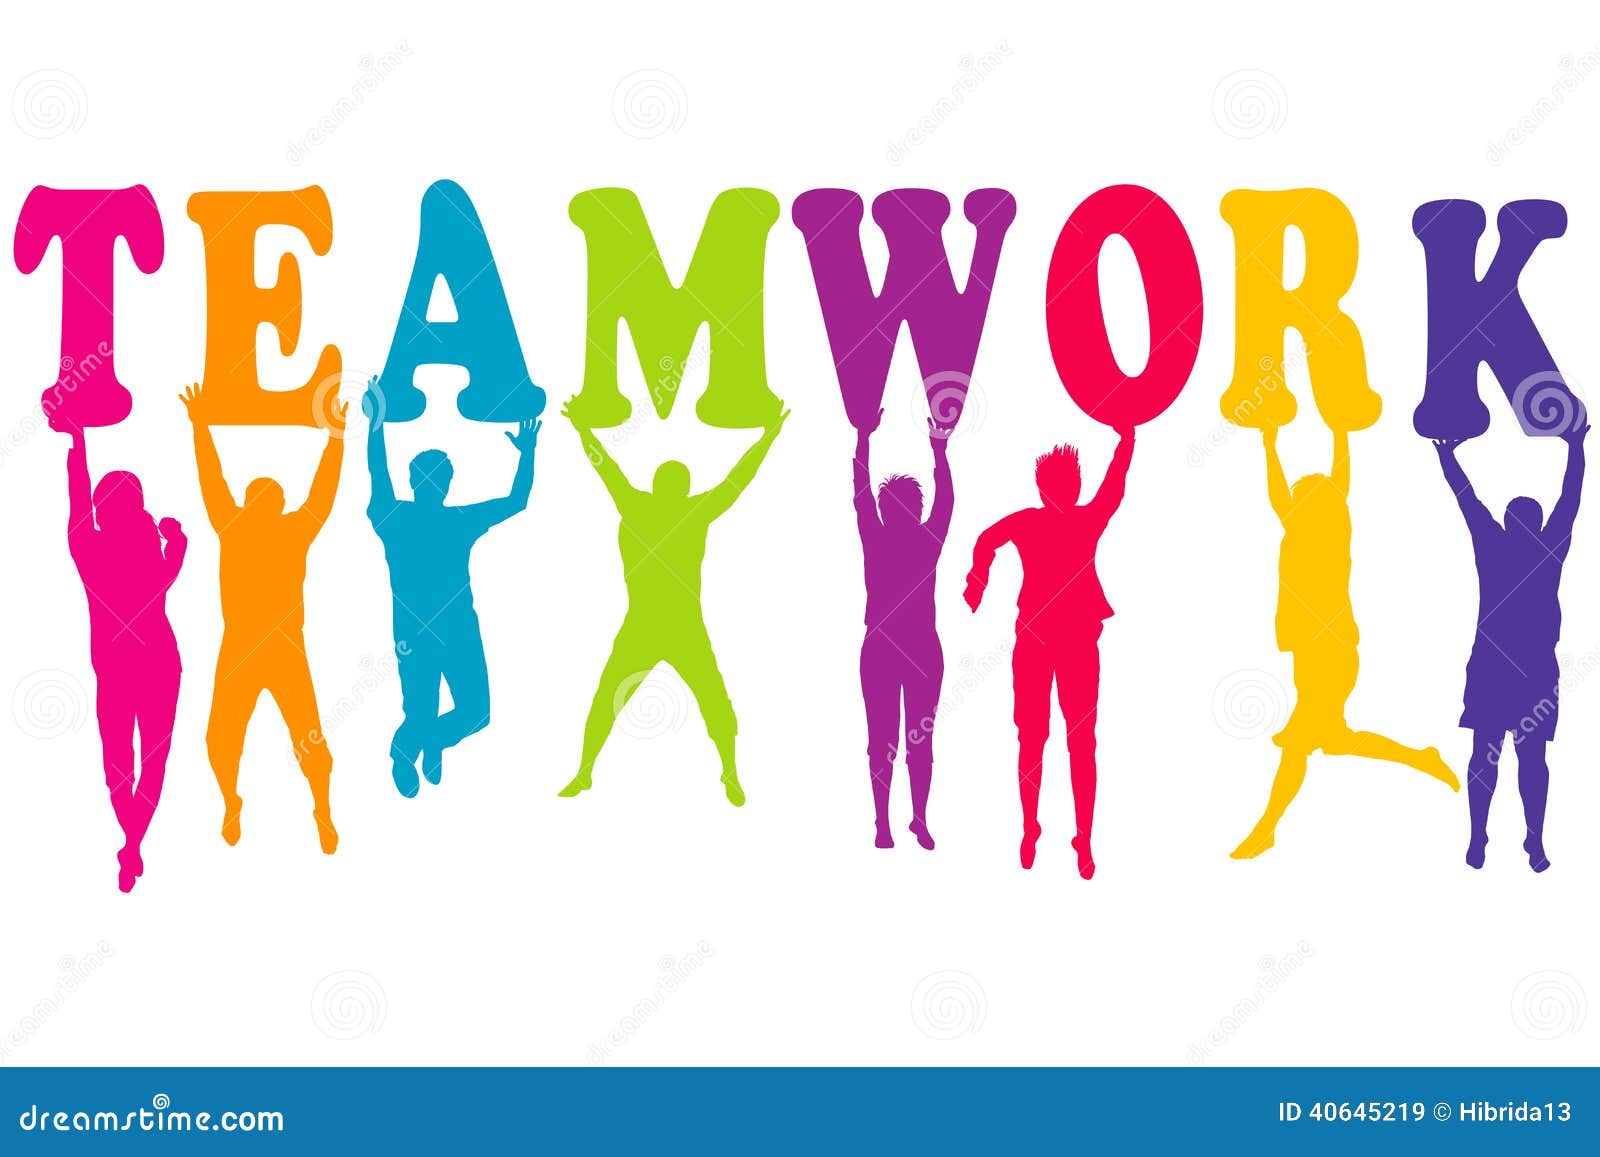 Teamwork Concept With Colored Women And Men Silhouettes Jumping Stock ...